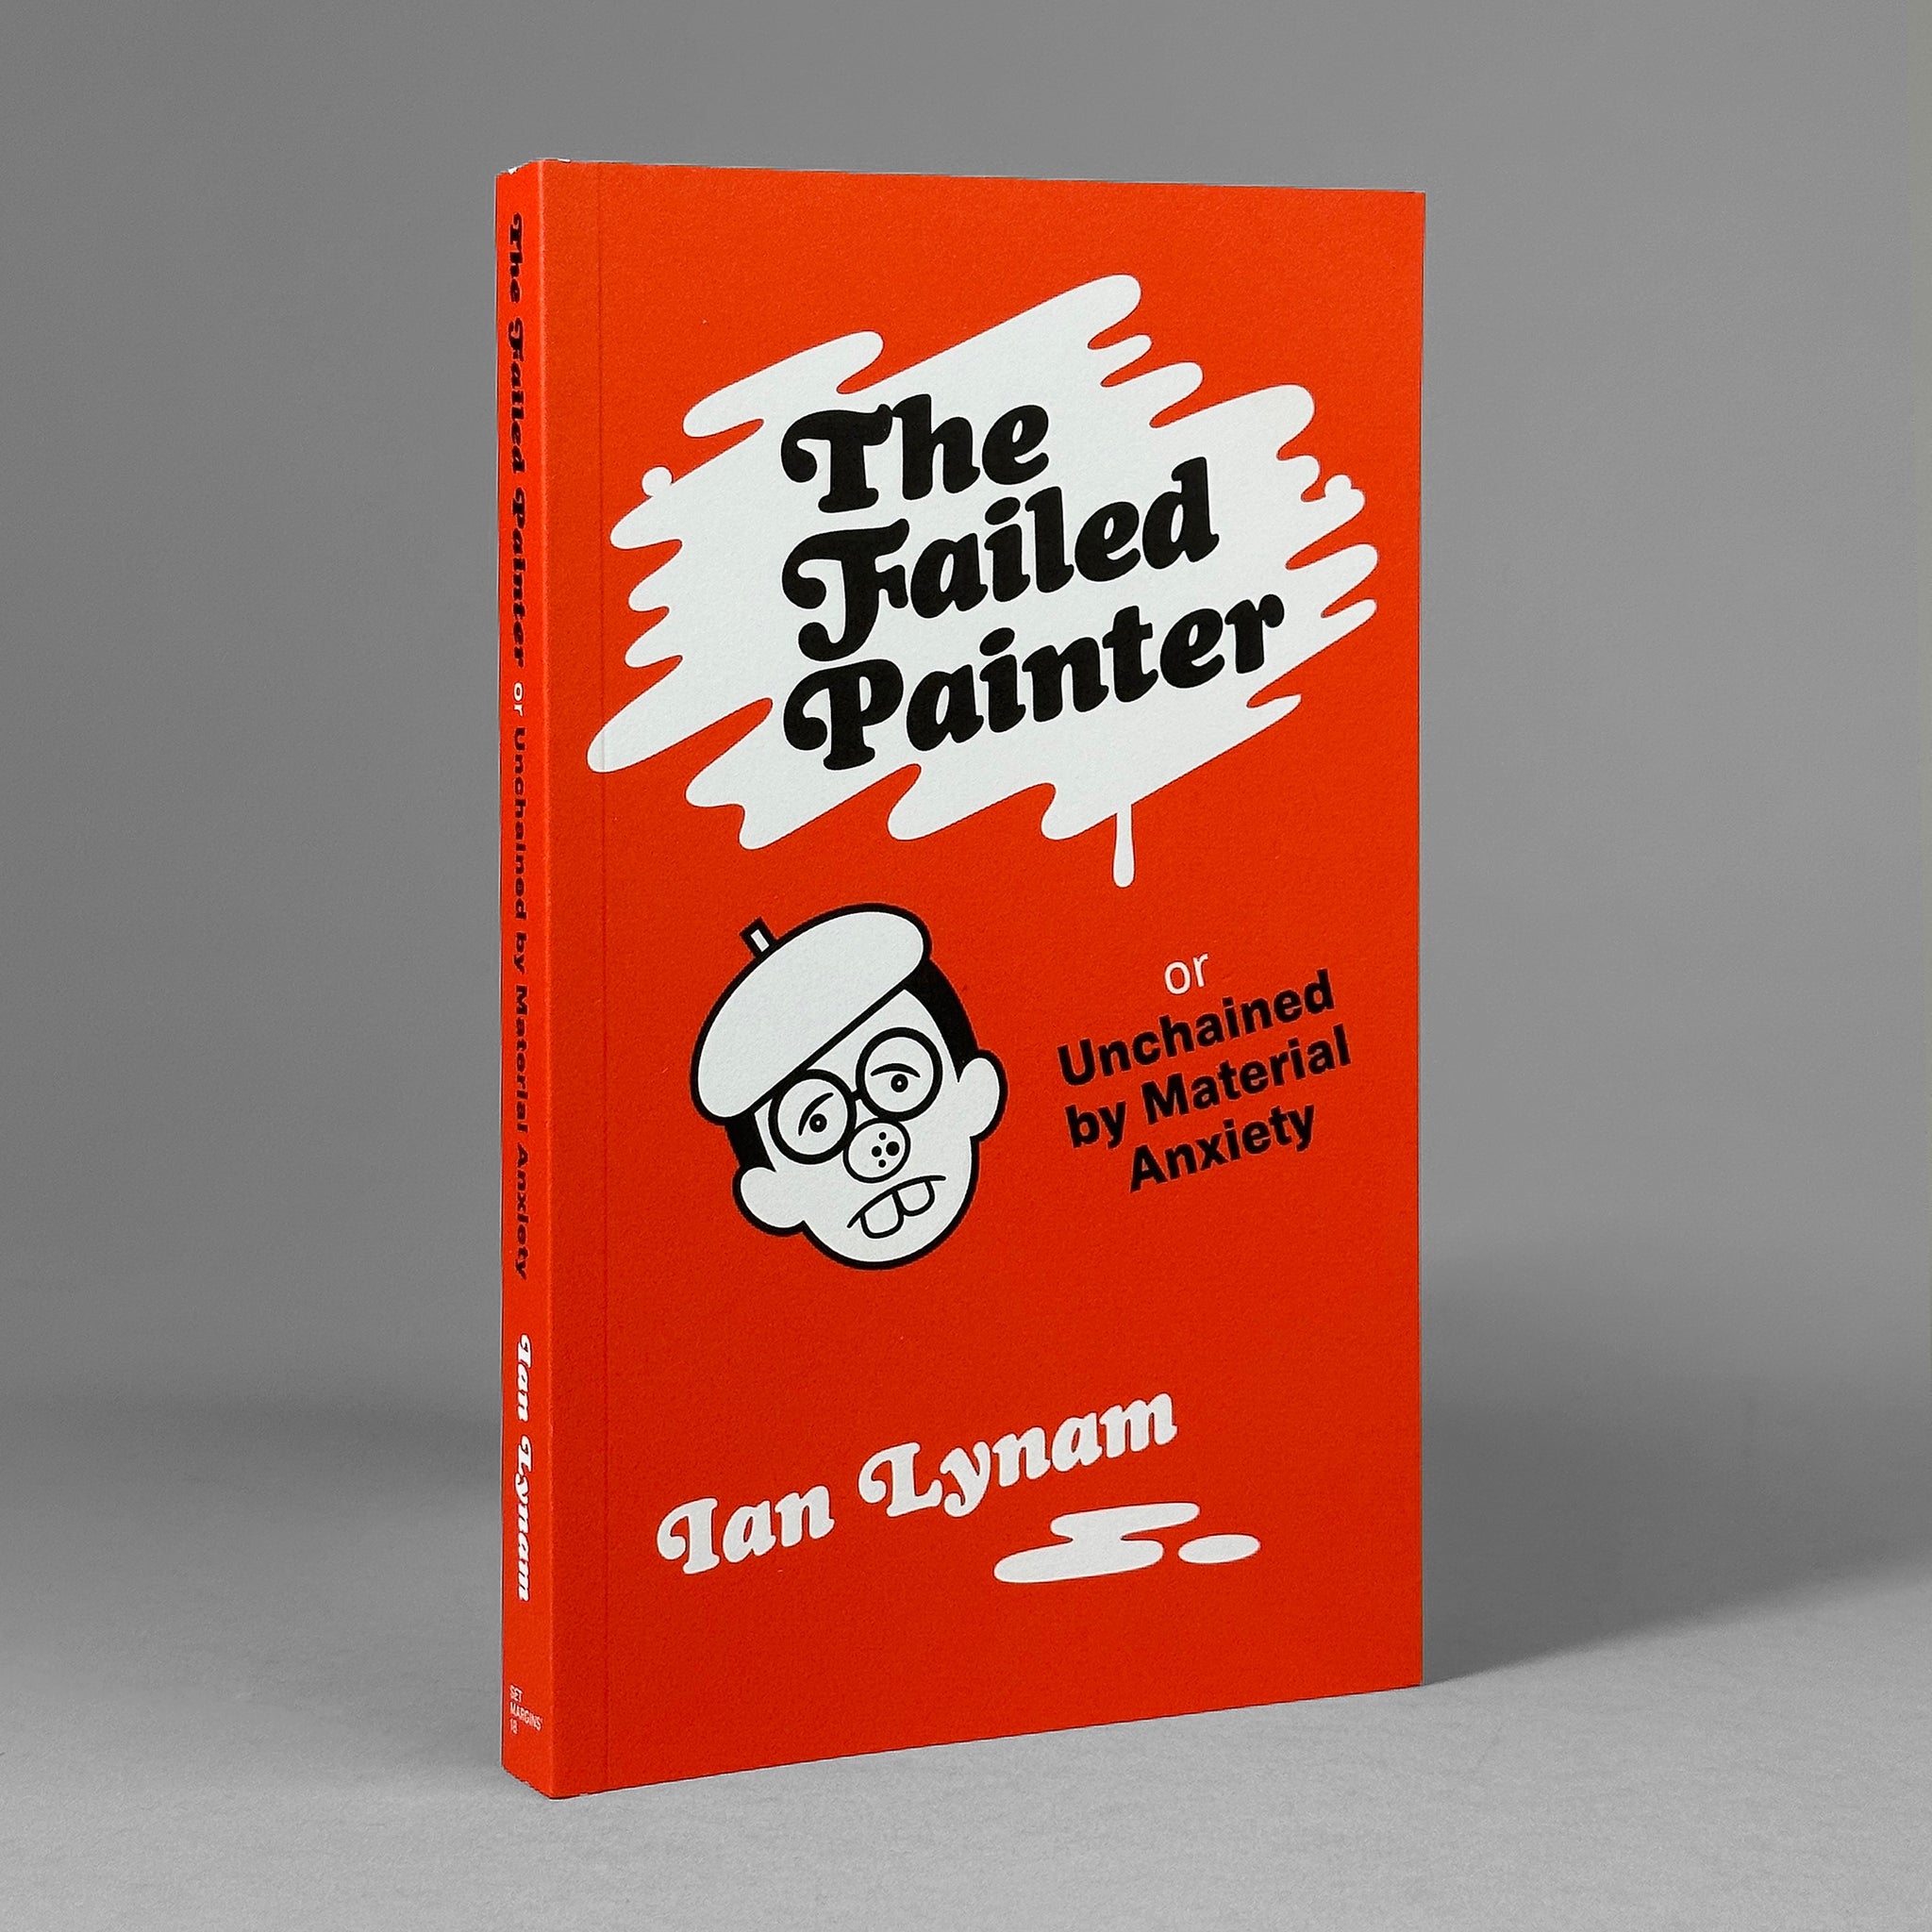 The Failed Painter or: Unchained by Material Anxiety